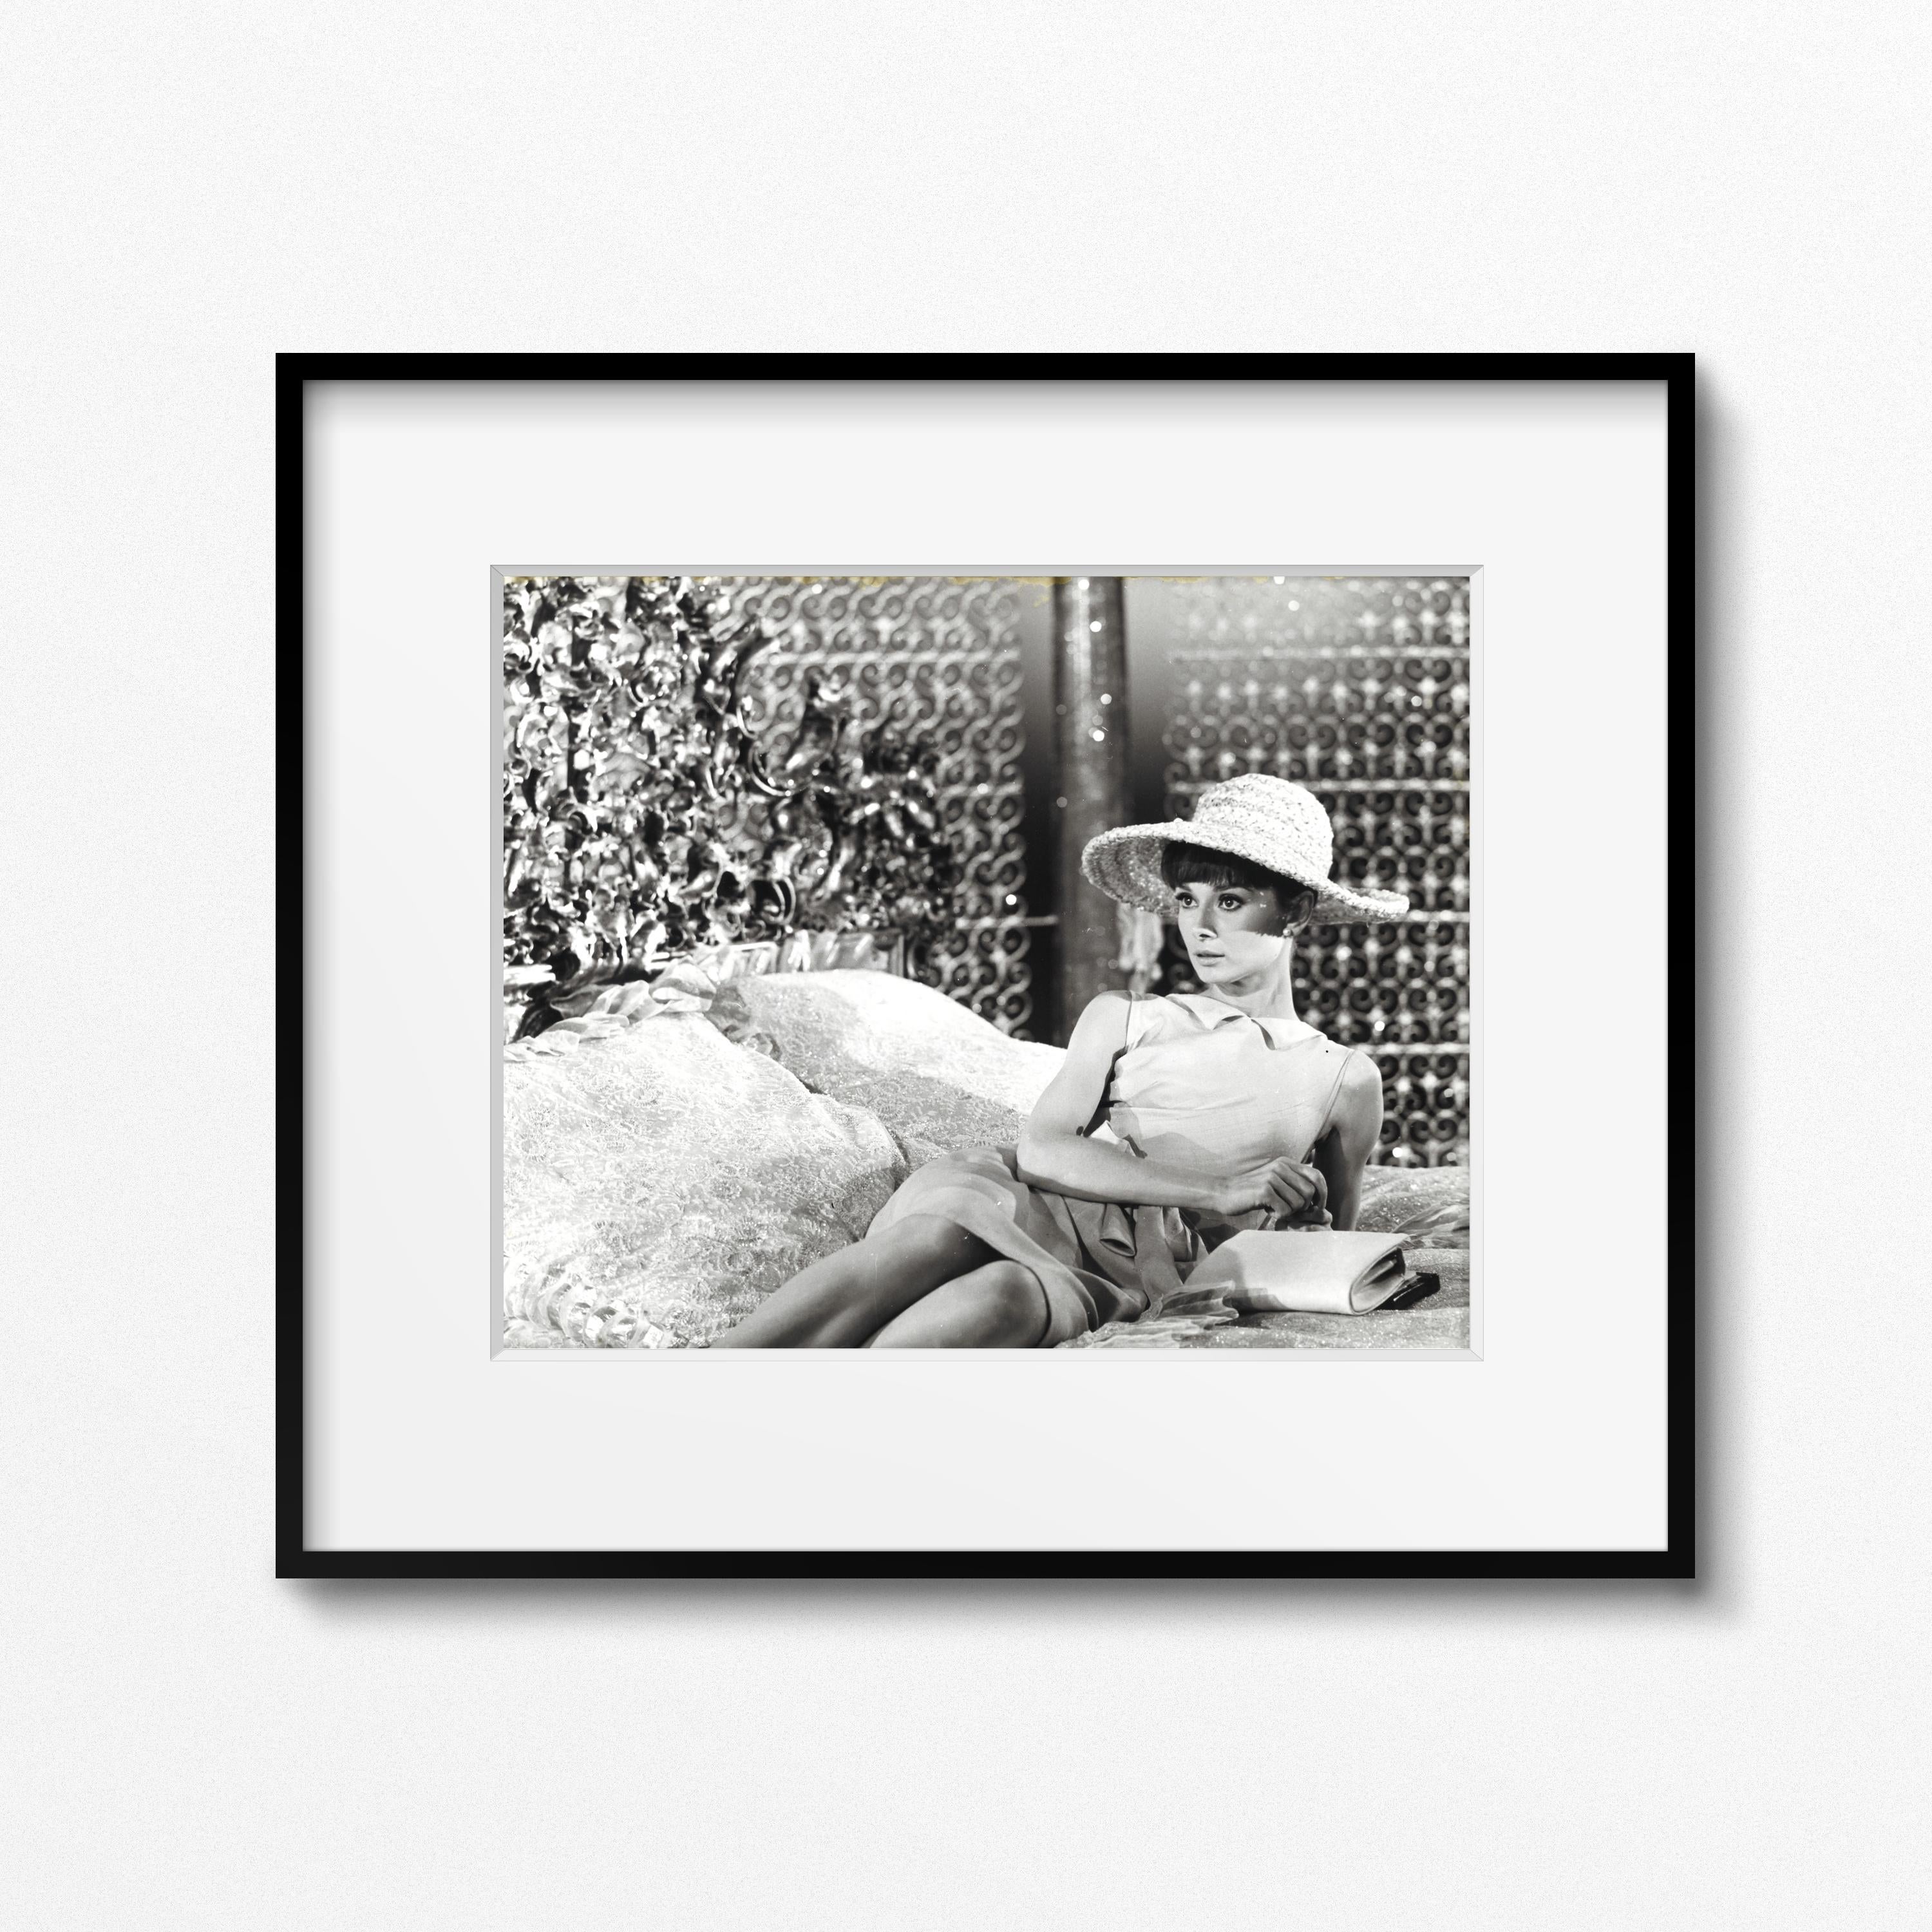 From the Personal collection of Audrey Hepburn

Audrey Hepburn on the set of 'Paris When it Sizzles,' Paris, 1962 by Vincent Rossell
Vintage gelatin silver print
Photographer's credit stamp, Audrey Hepburn collection stamp and numerical